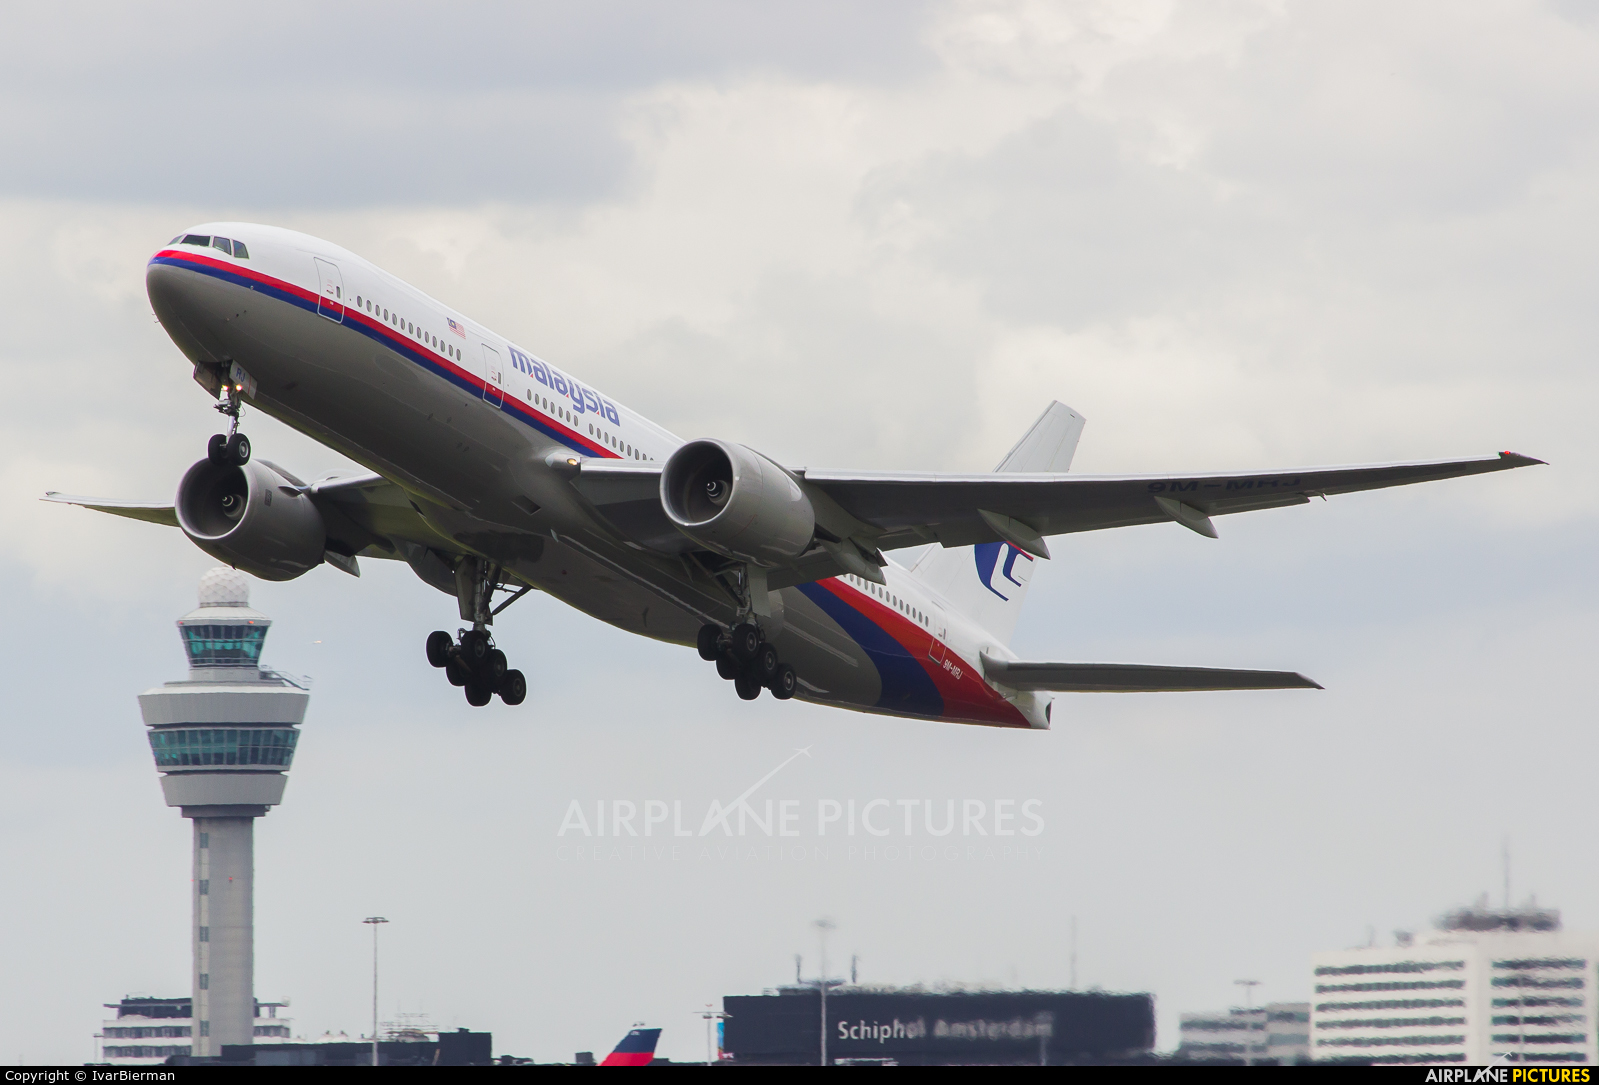 Malaysia Airlines 9M-MRJ aircraft at Amsterdam - Schiphol